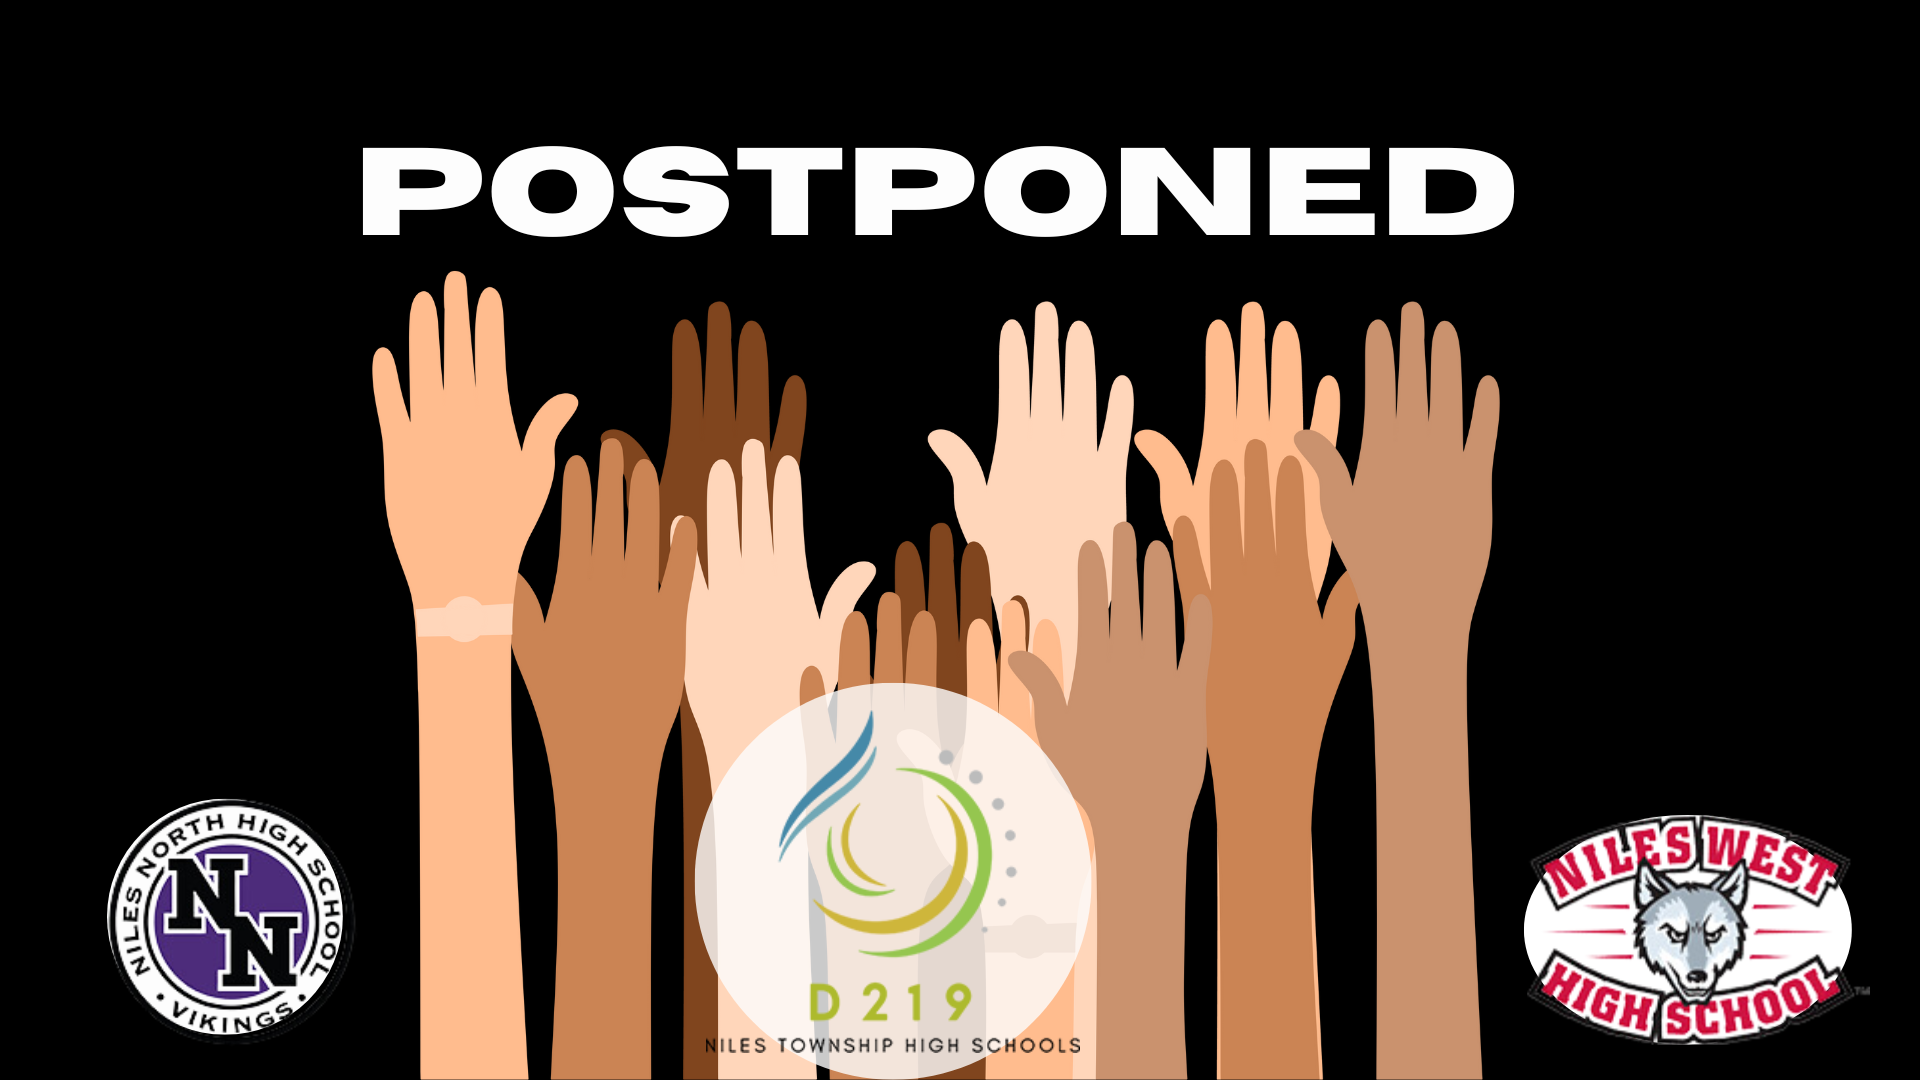 D219 has announced the Unity Summit which was set to take place in April has officially been postponed until Fall of 2024